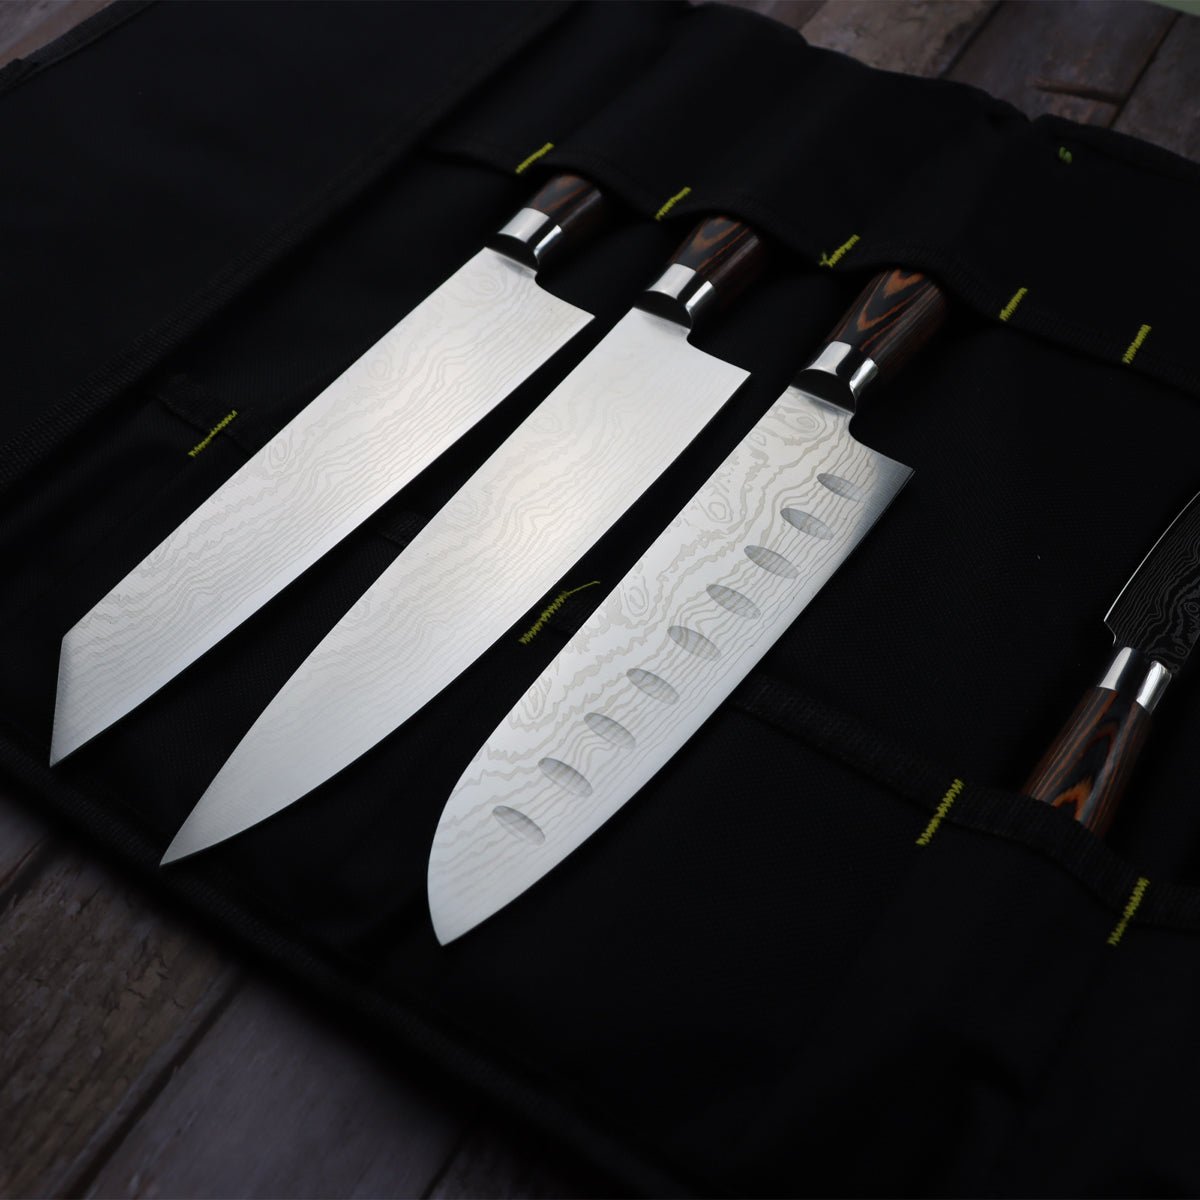 7 Piece Kitchen Knife Set With Carry Case - Letcase